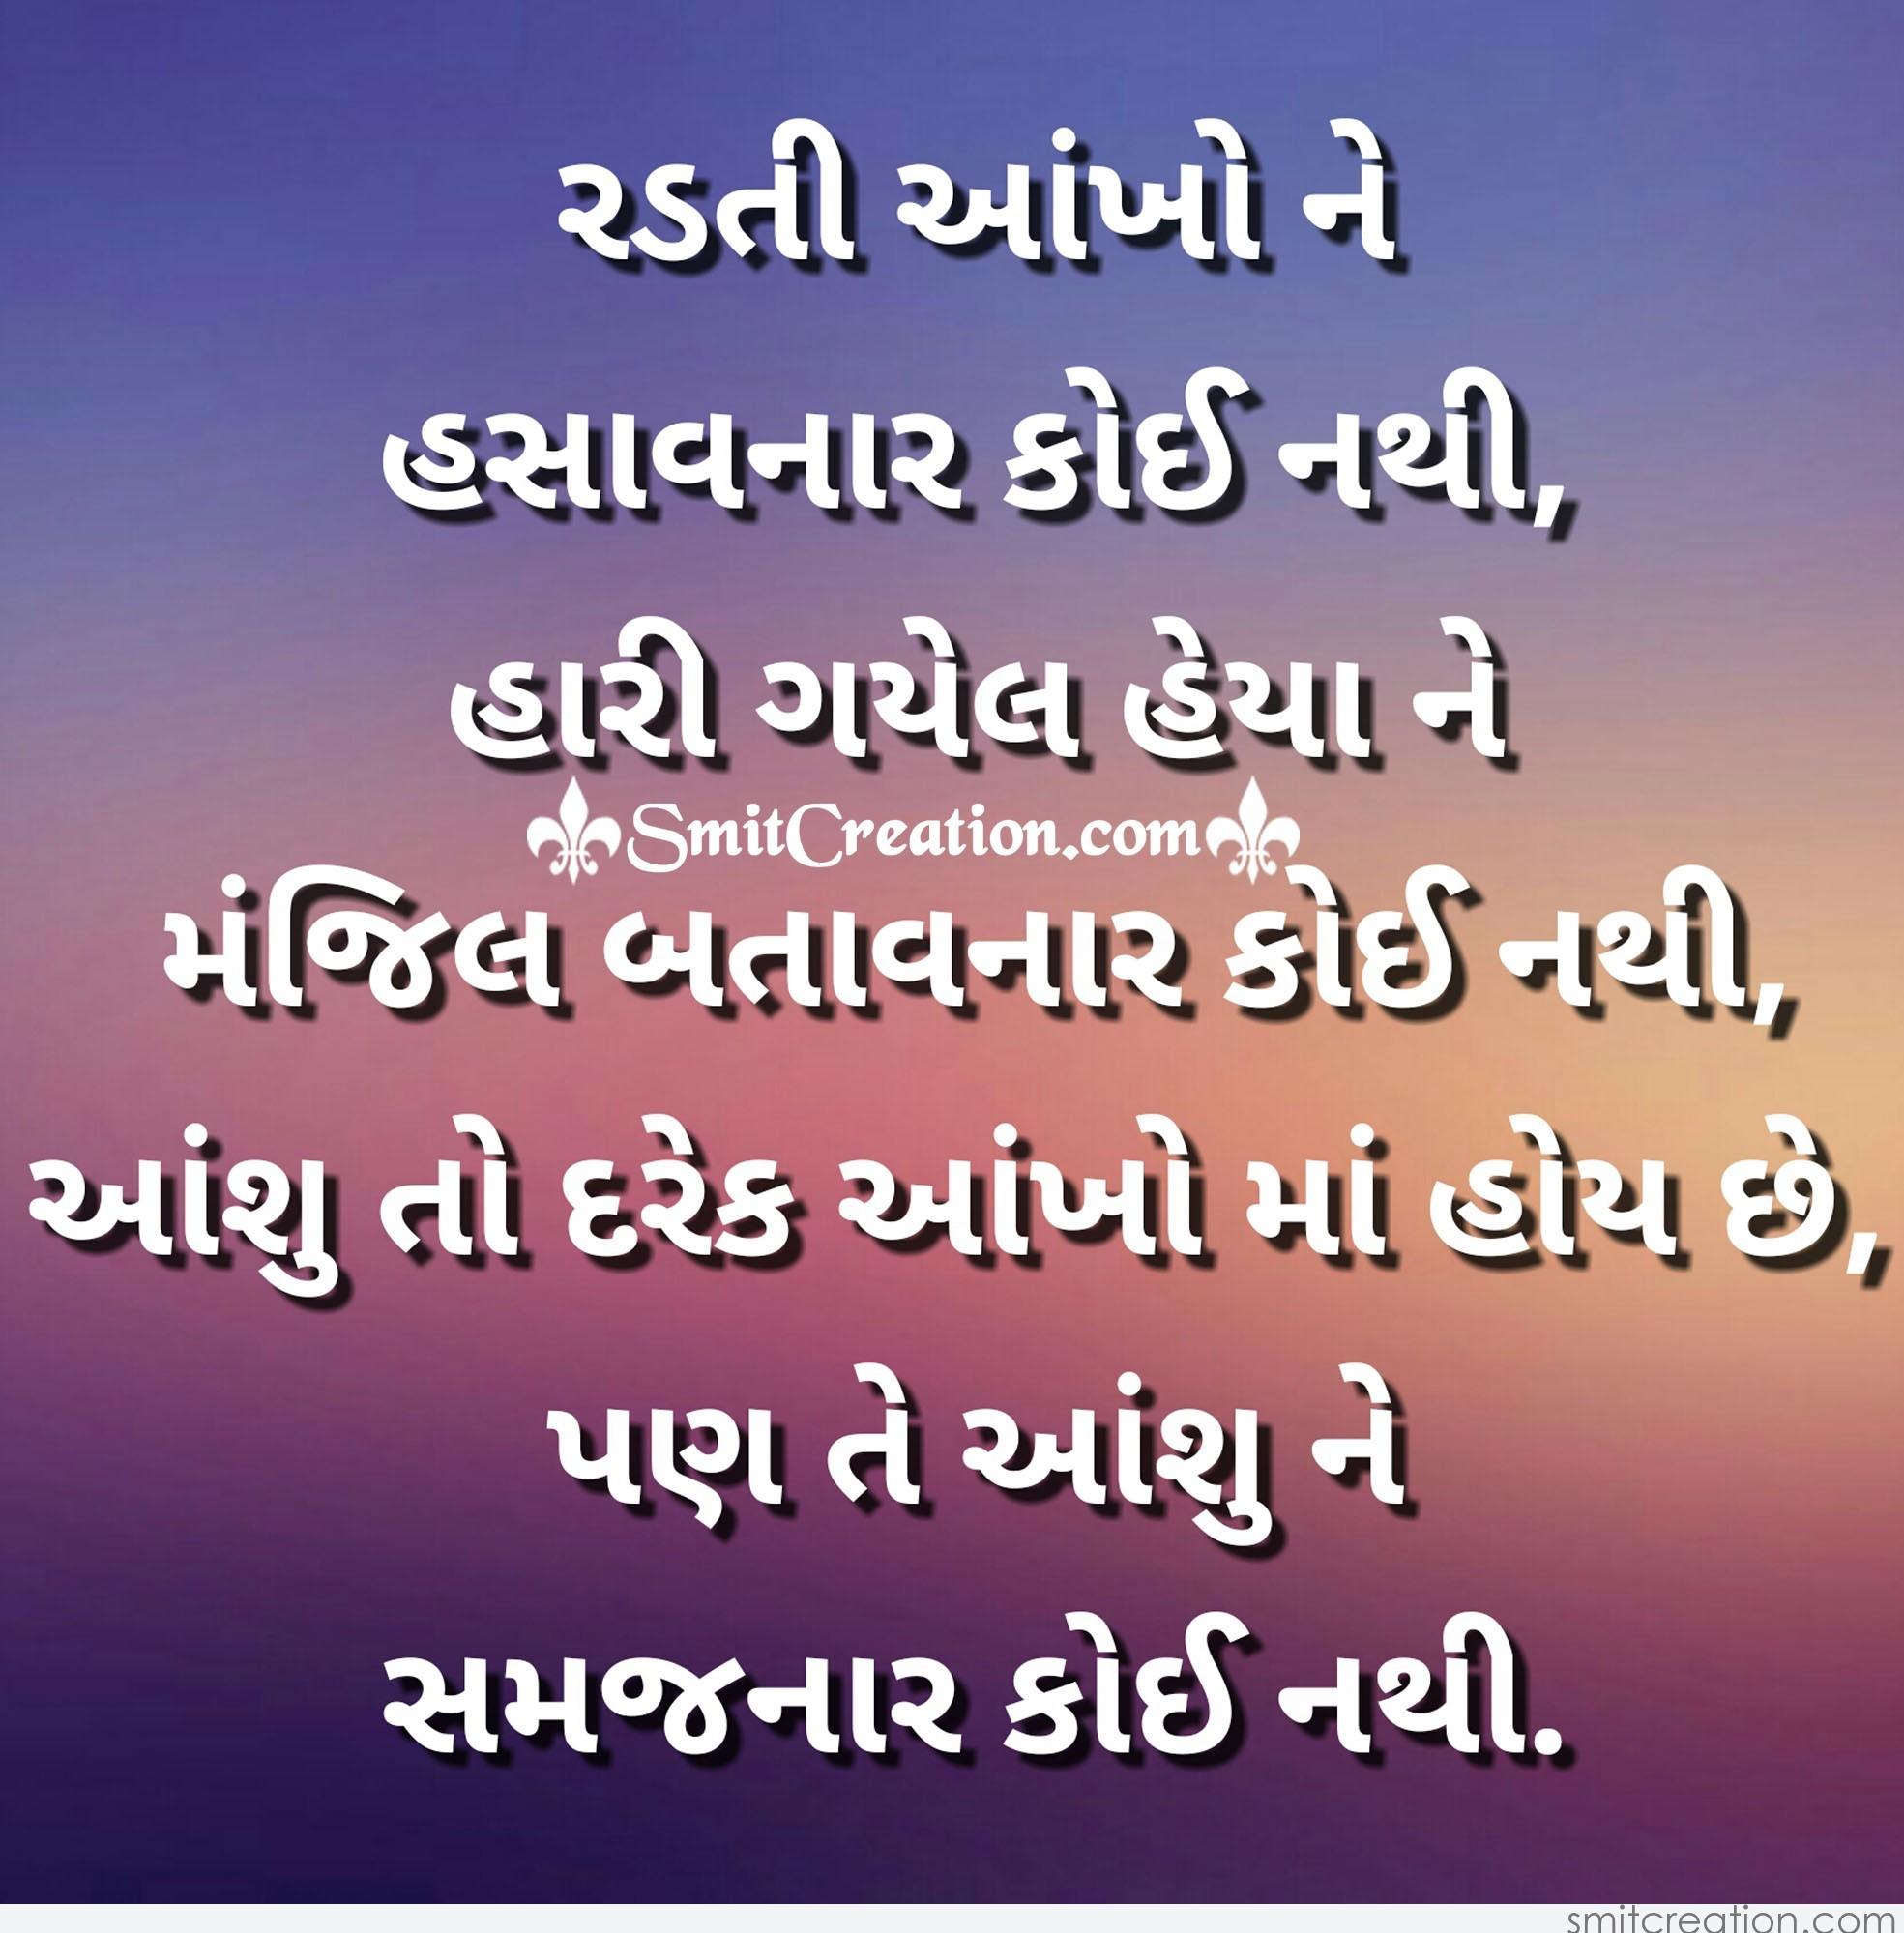 Free Love messages in gujarati language